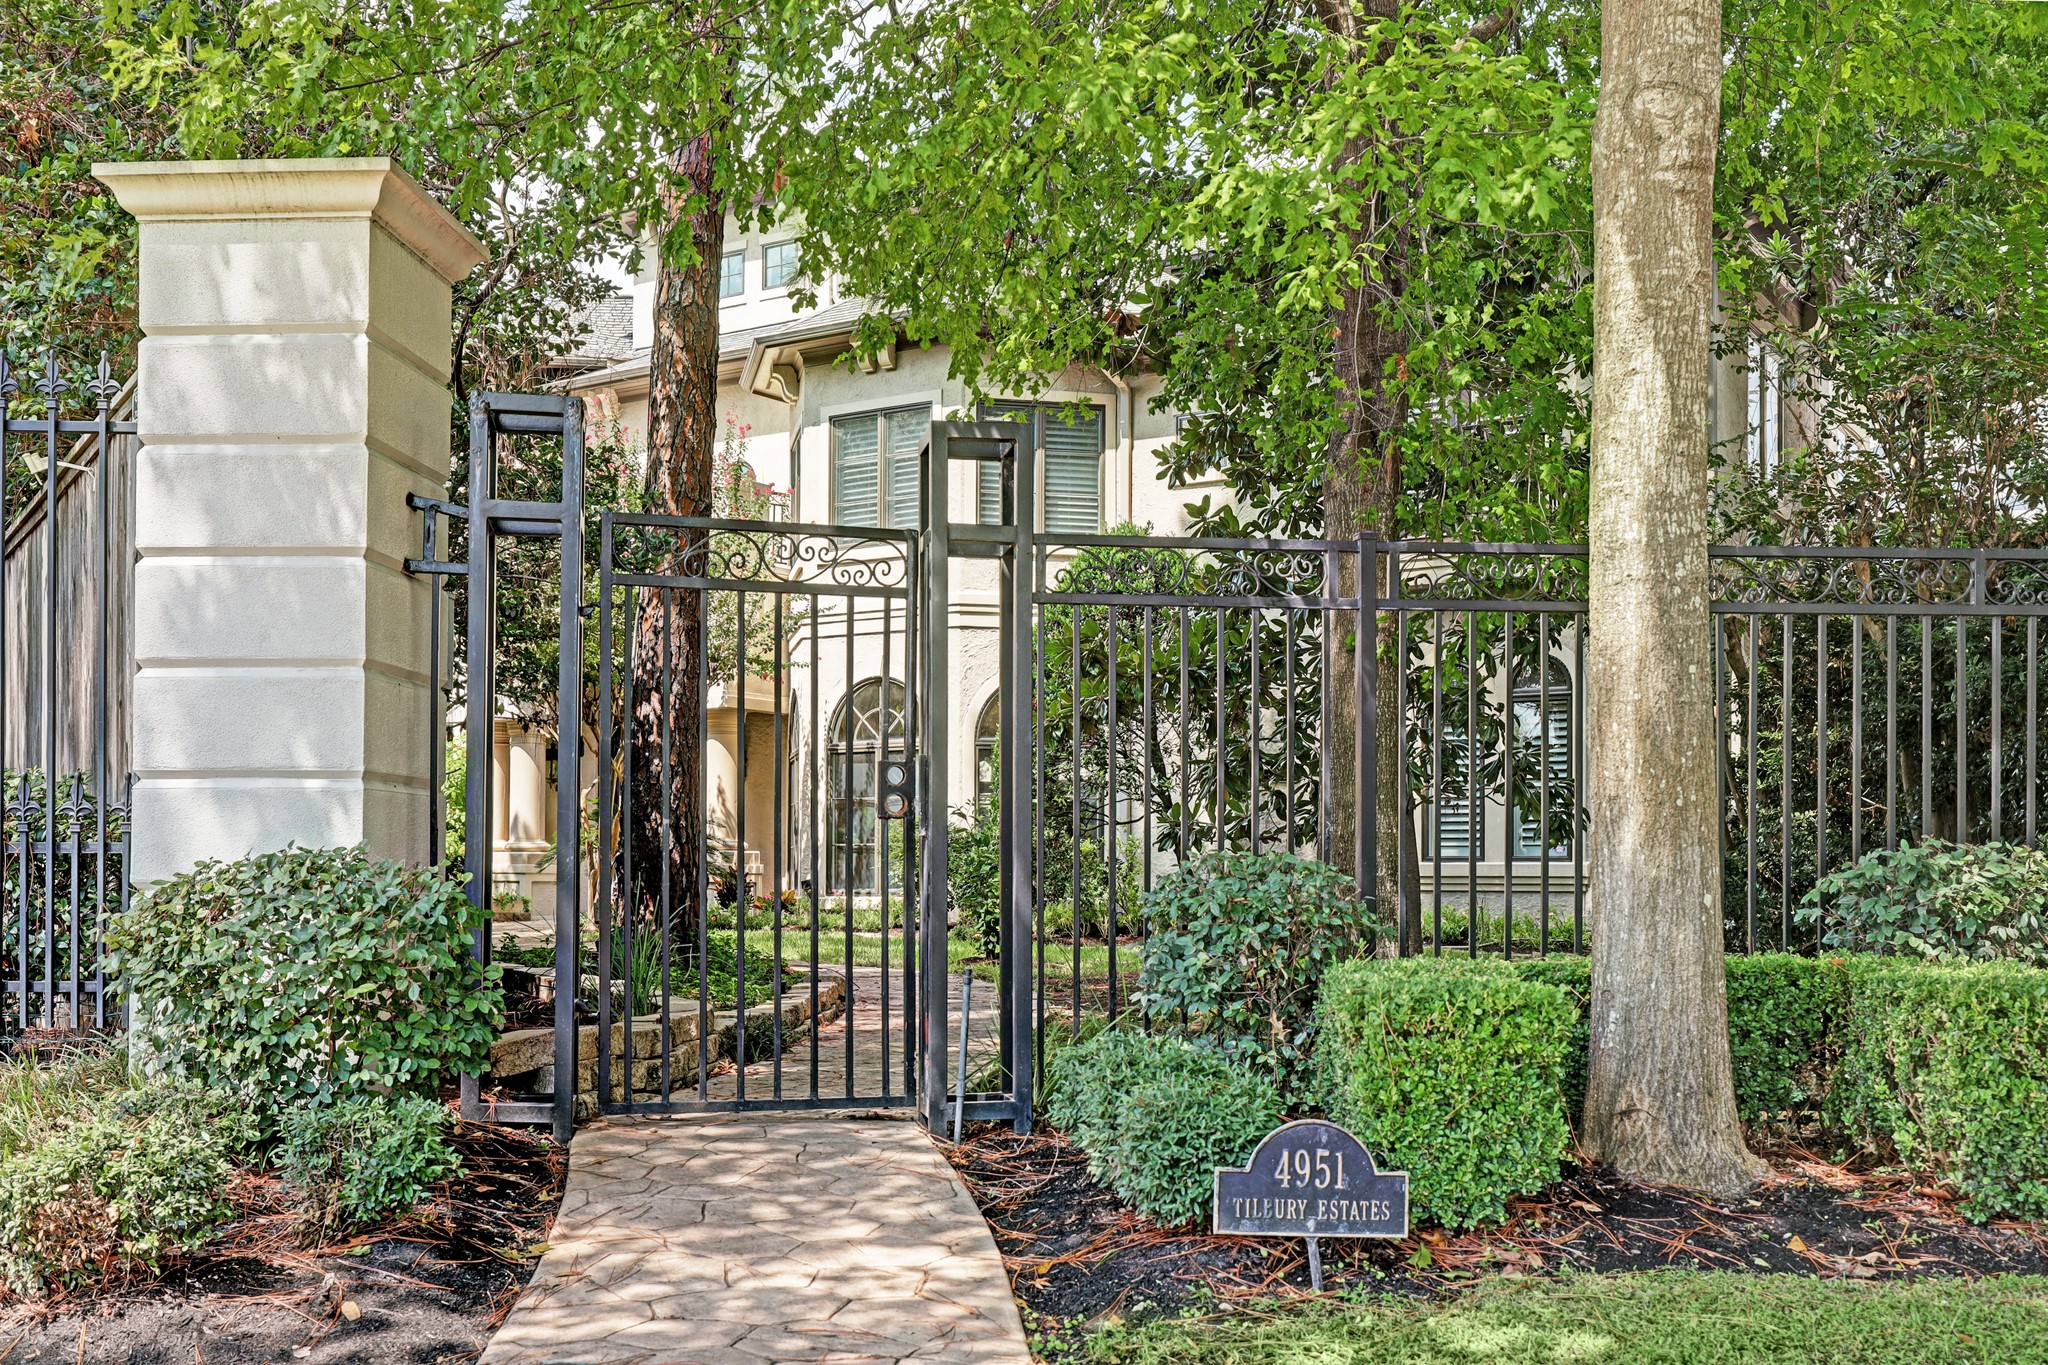 From the front gate at the street, there is a sense of peace and privacy entering into the wooded, lushly landscaped front garden area.